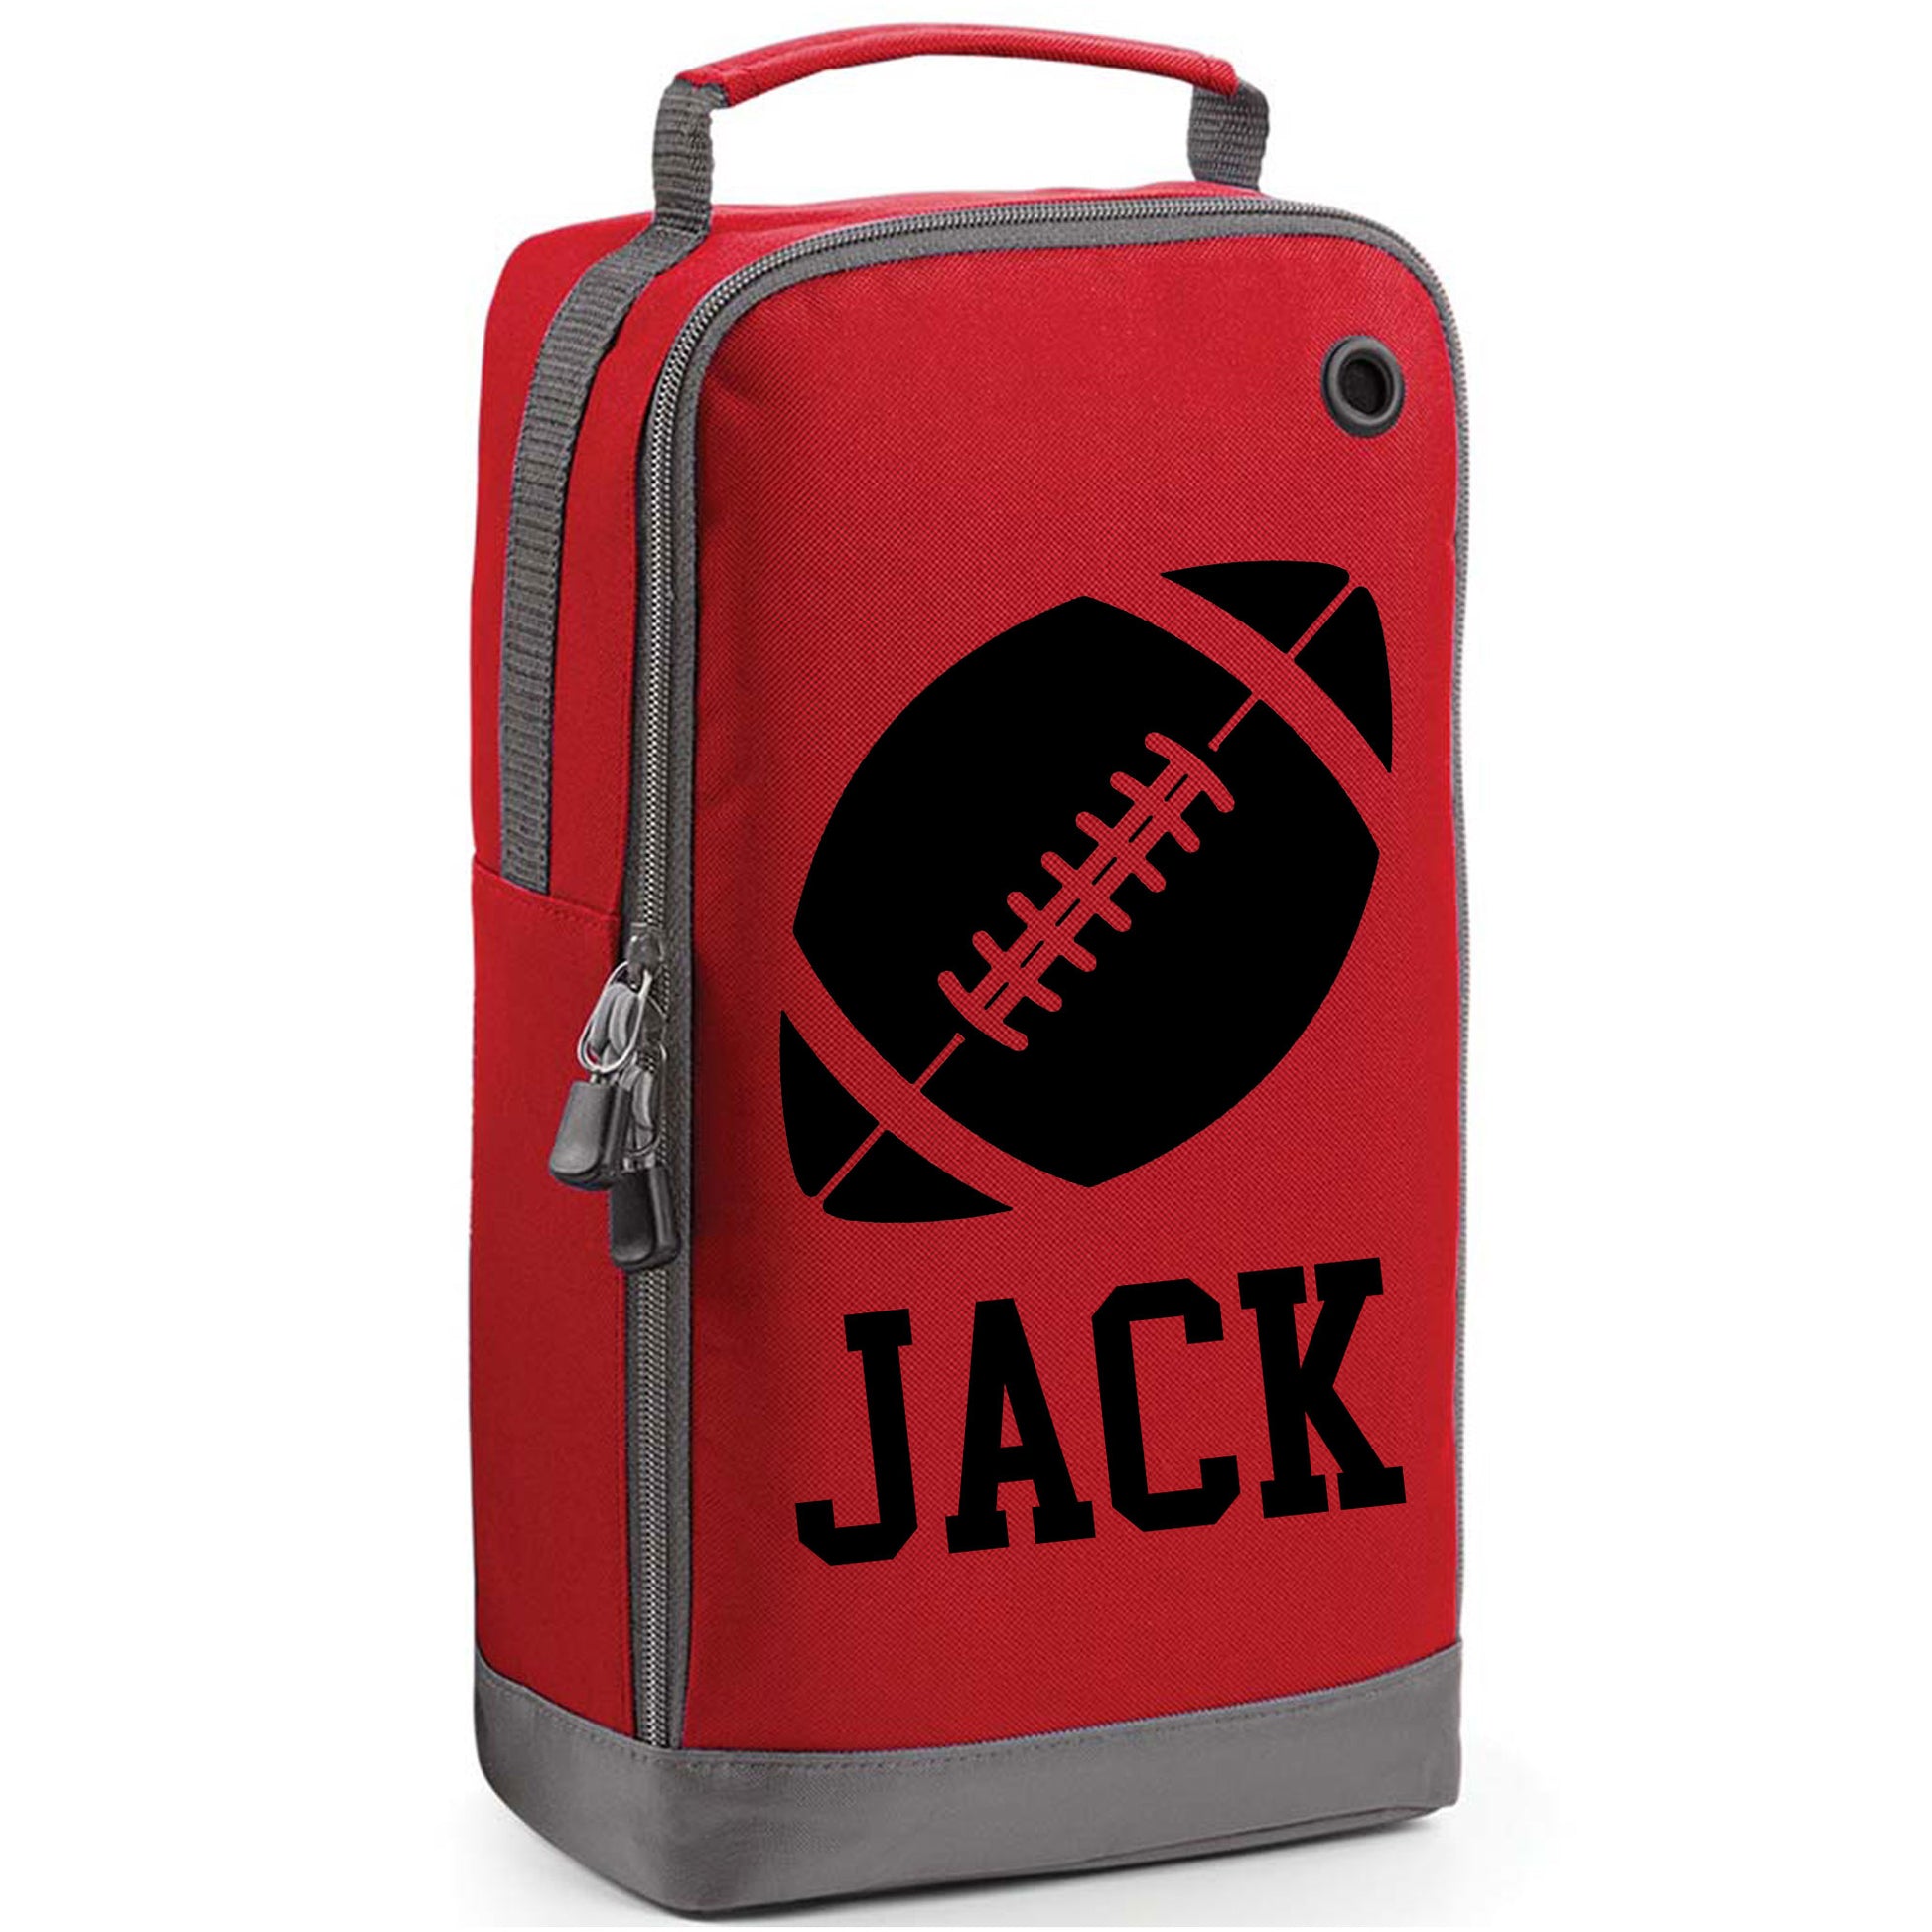 Personalised Rugby/ American Football Boot Bag with Design & Name  - Always Looking Good - Red  